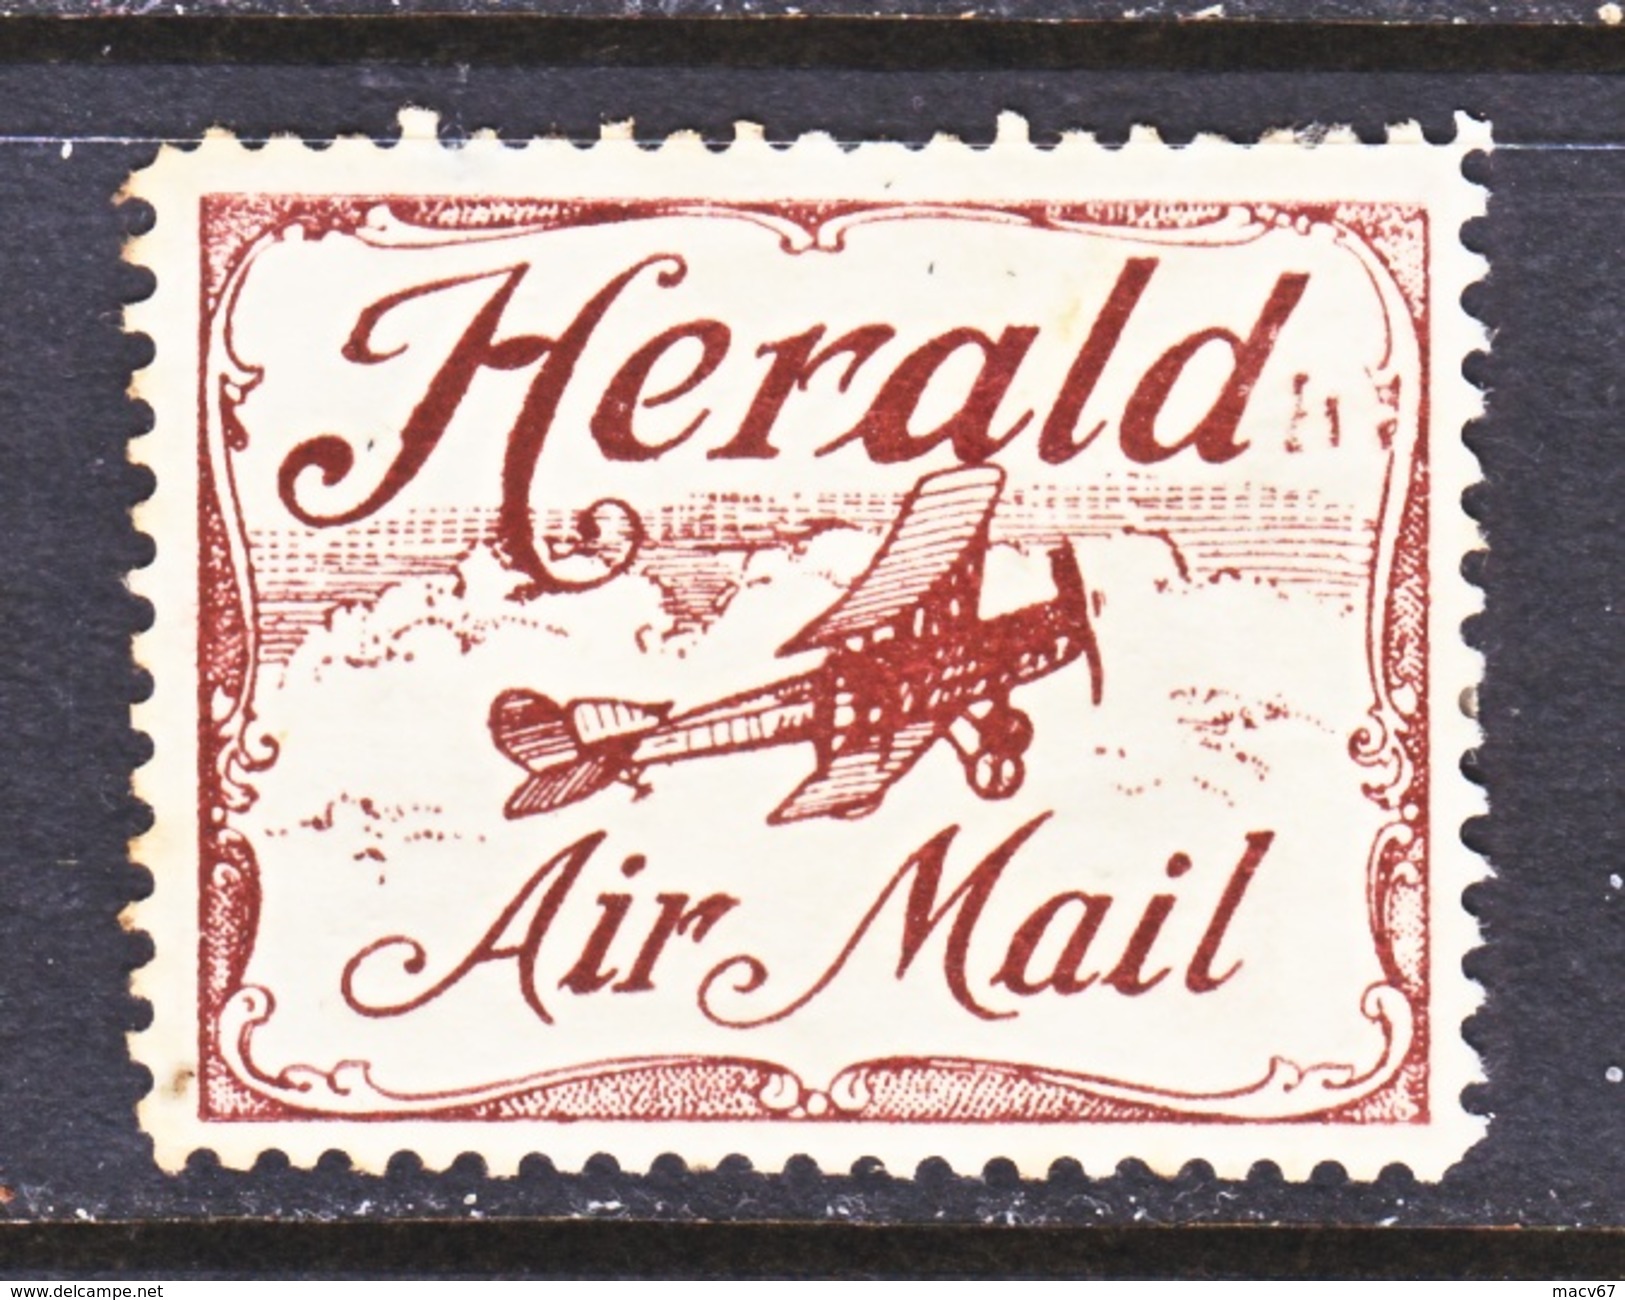 AUSTRALIA  SEMI-OFFICIAL  SO 2   *  HERALD  AIR  MAIL - Mint Stamps